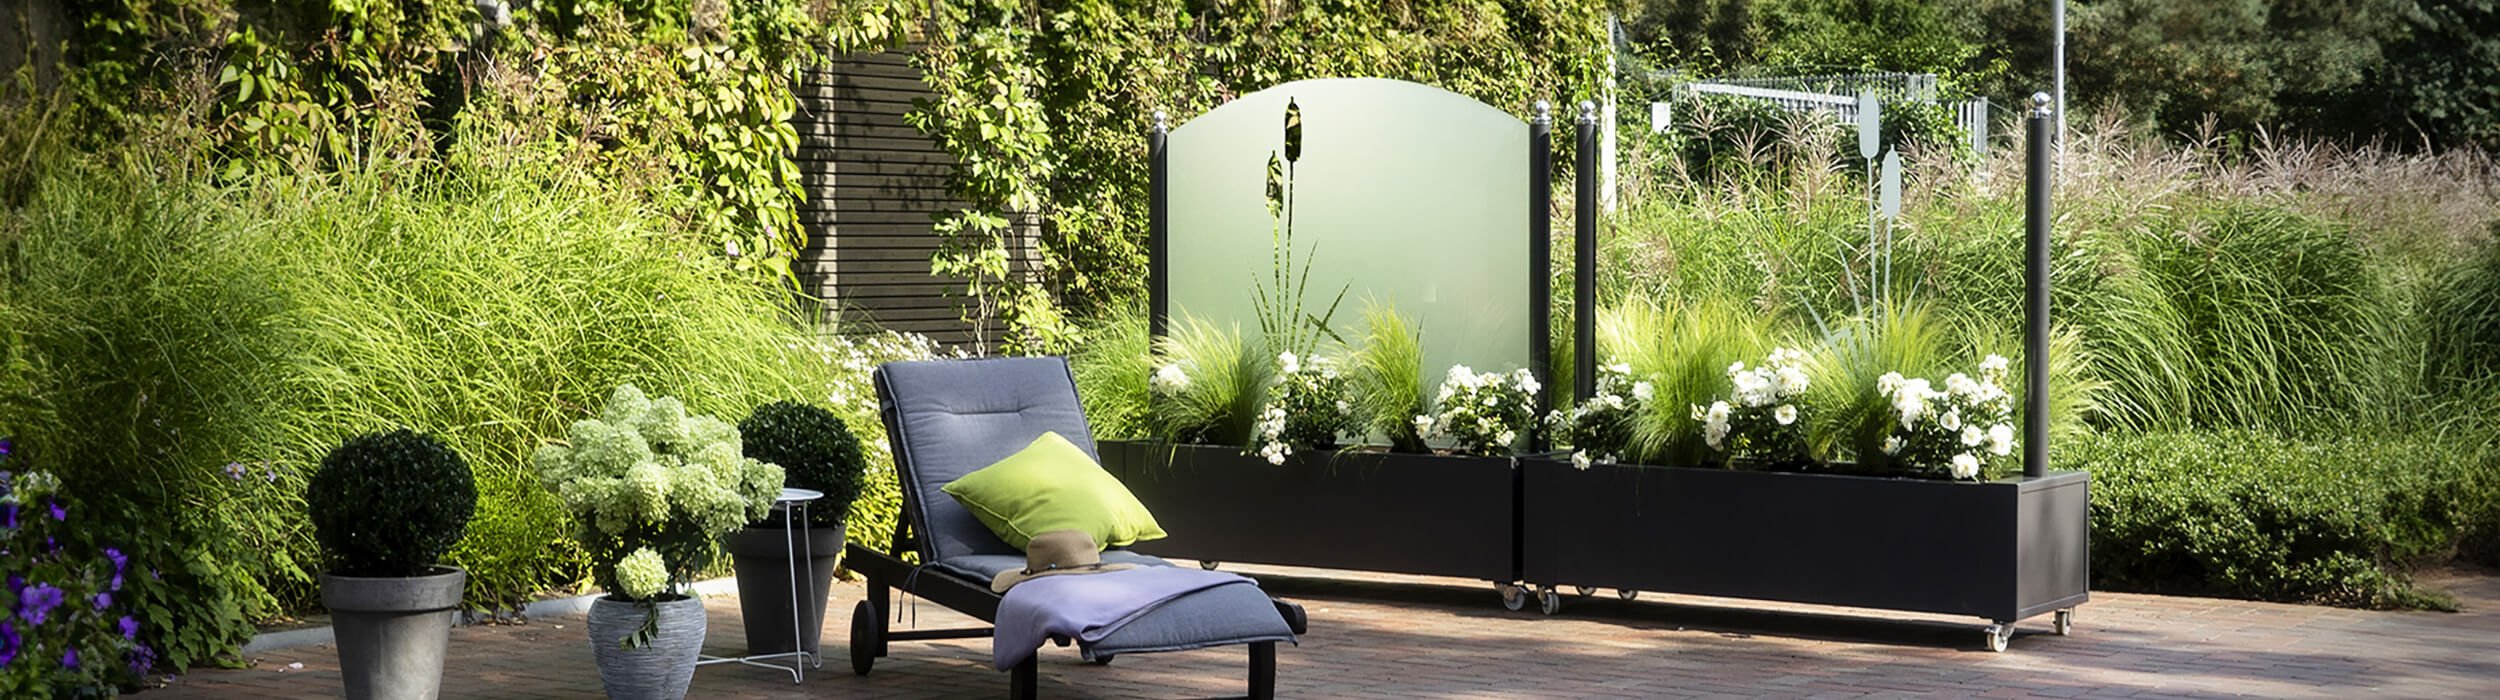 A lounge chair, three plants, and two wind protection elements on a terrace.